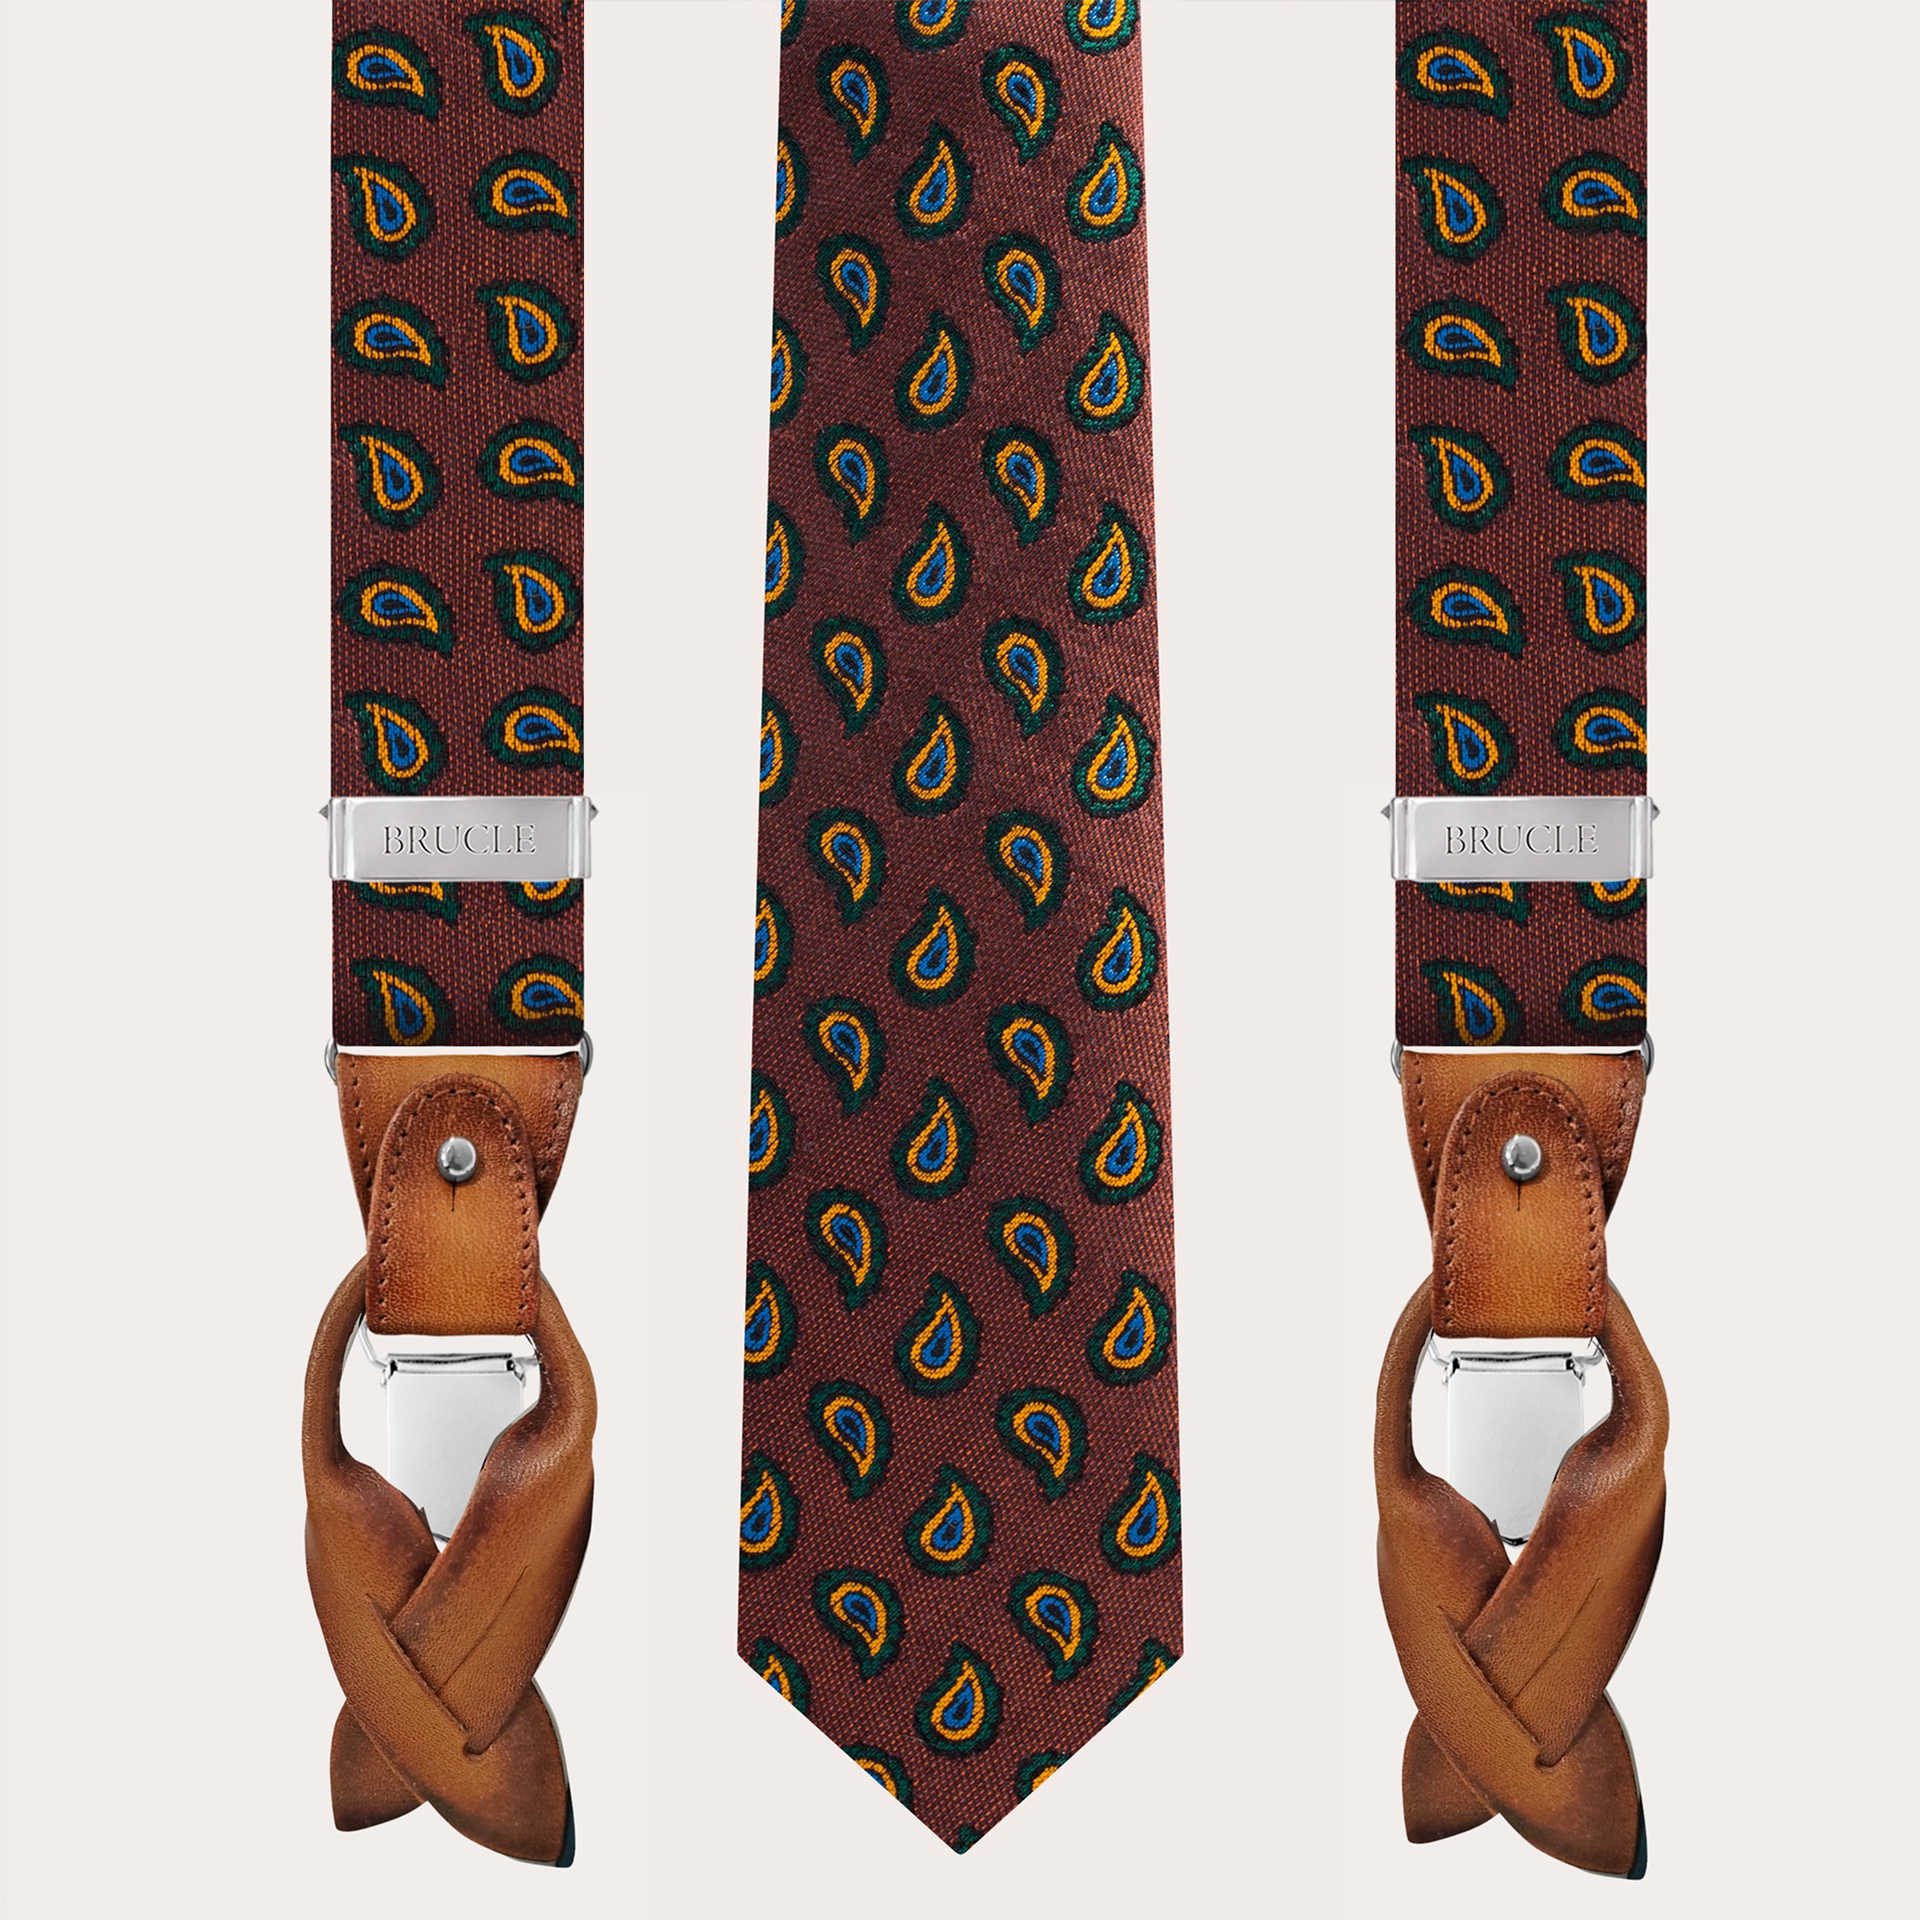 BRUCLE Orange and brown paisley pattern silk and cotton suspender and tie set